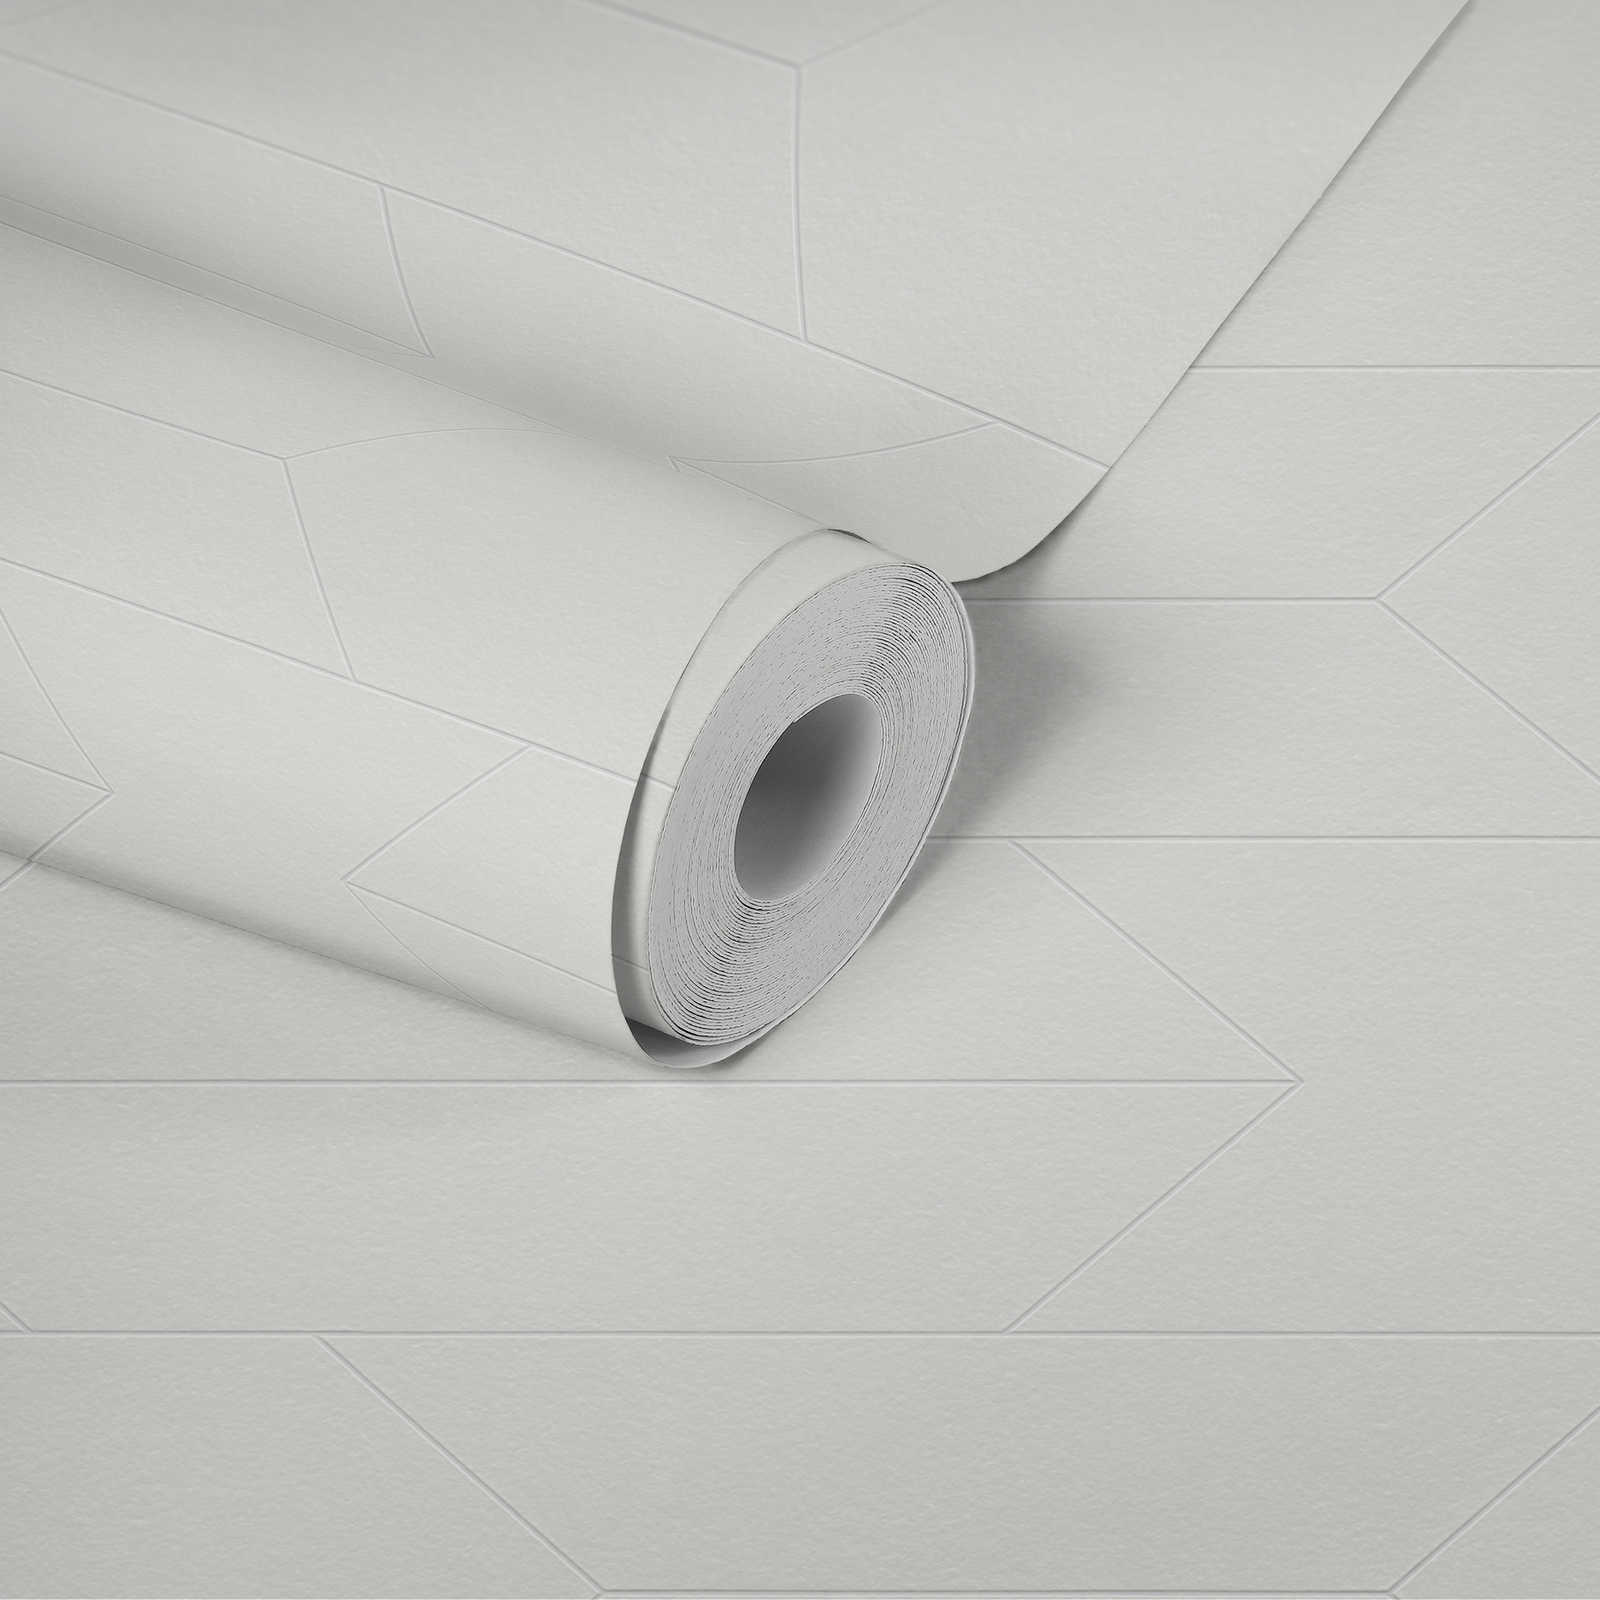             Non-woven wallpaper paintable with zigzag line pattern - 25,00 m x 1,06 m
        